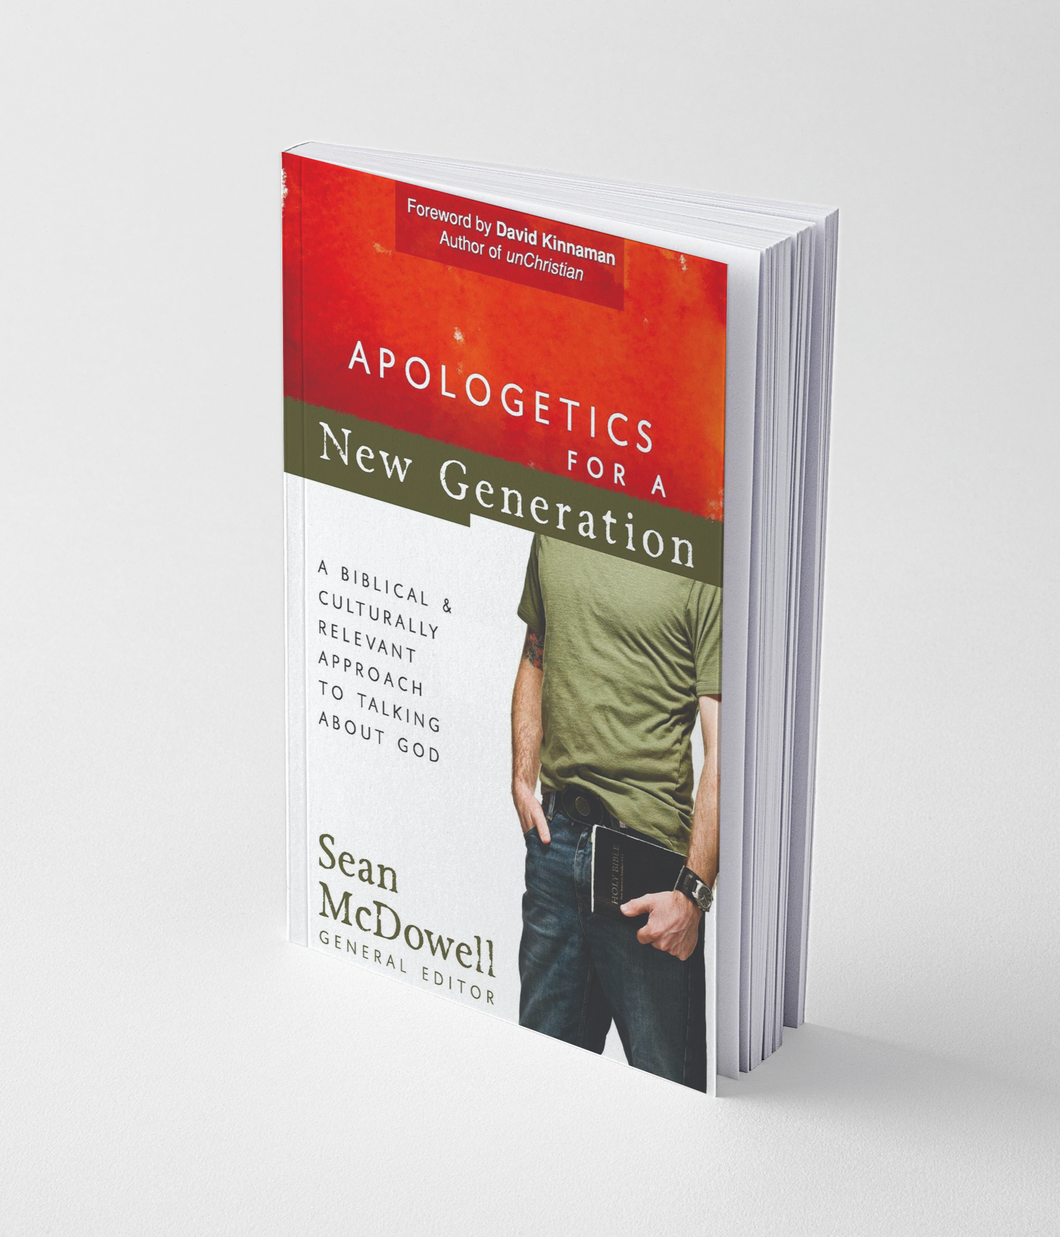 Apologetics for a New Generation by Sean McDowell